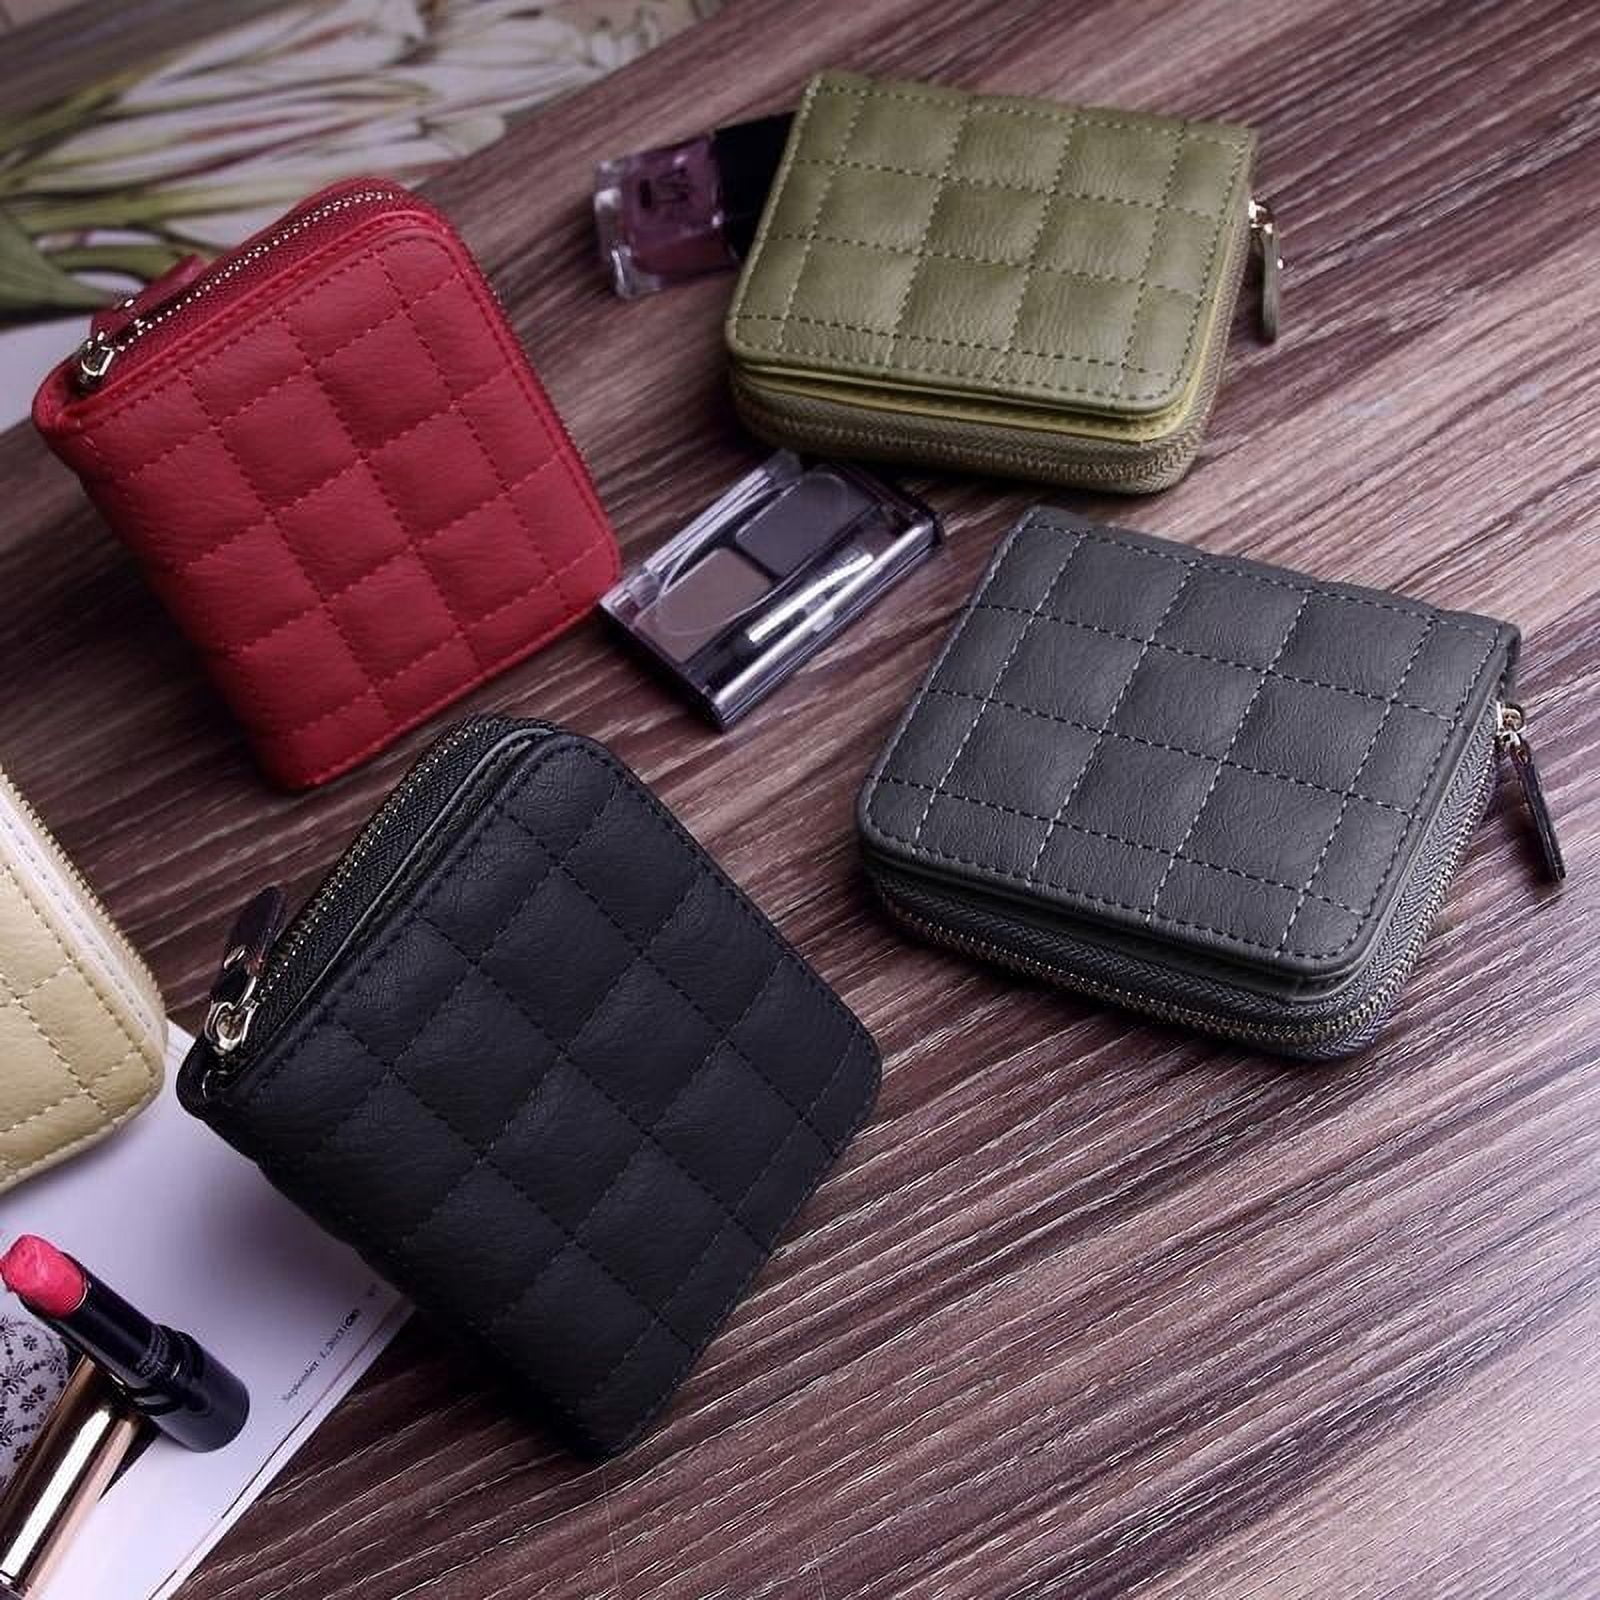 Cocopeaunts Women Wallets New Luxury Brand Red Black Small Mini Coin Purse Hasp Card Holder Lady Wallet Zipper Female Leather Buckle, Adult Unisex